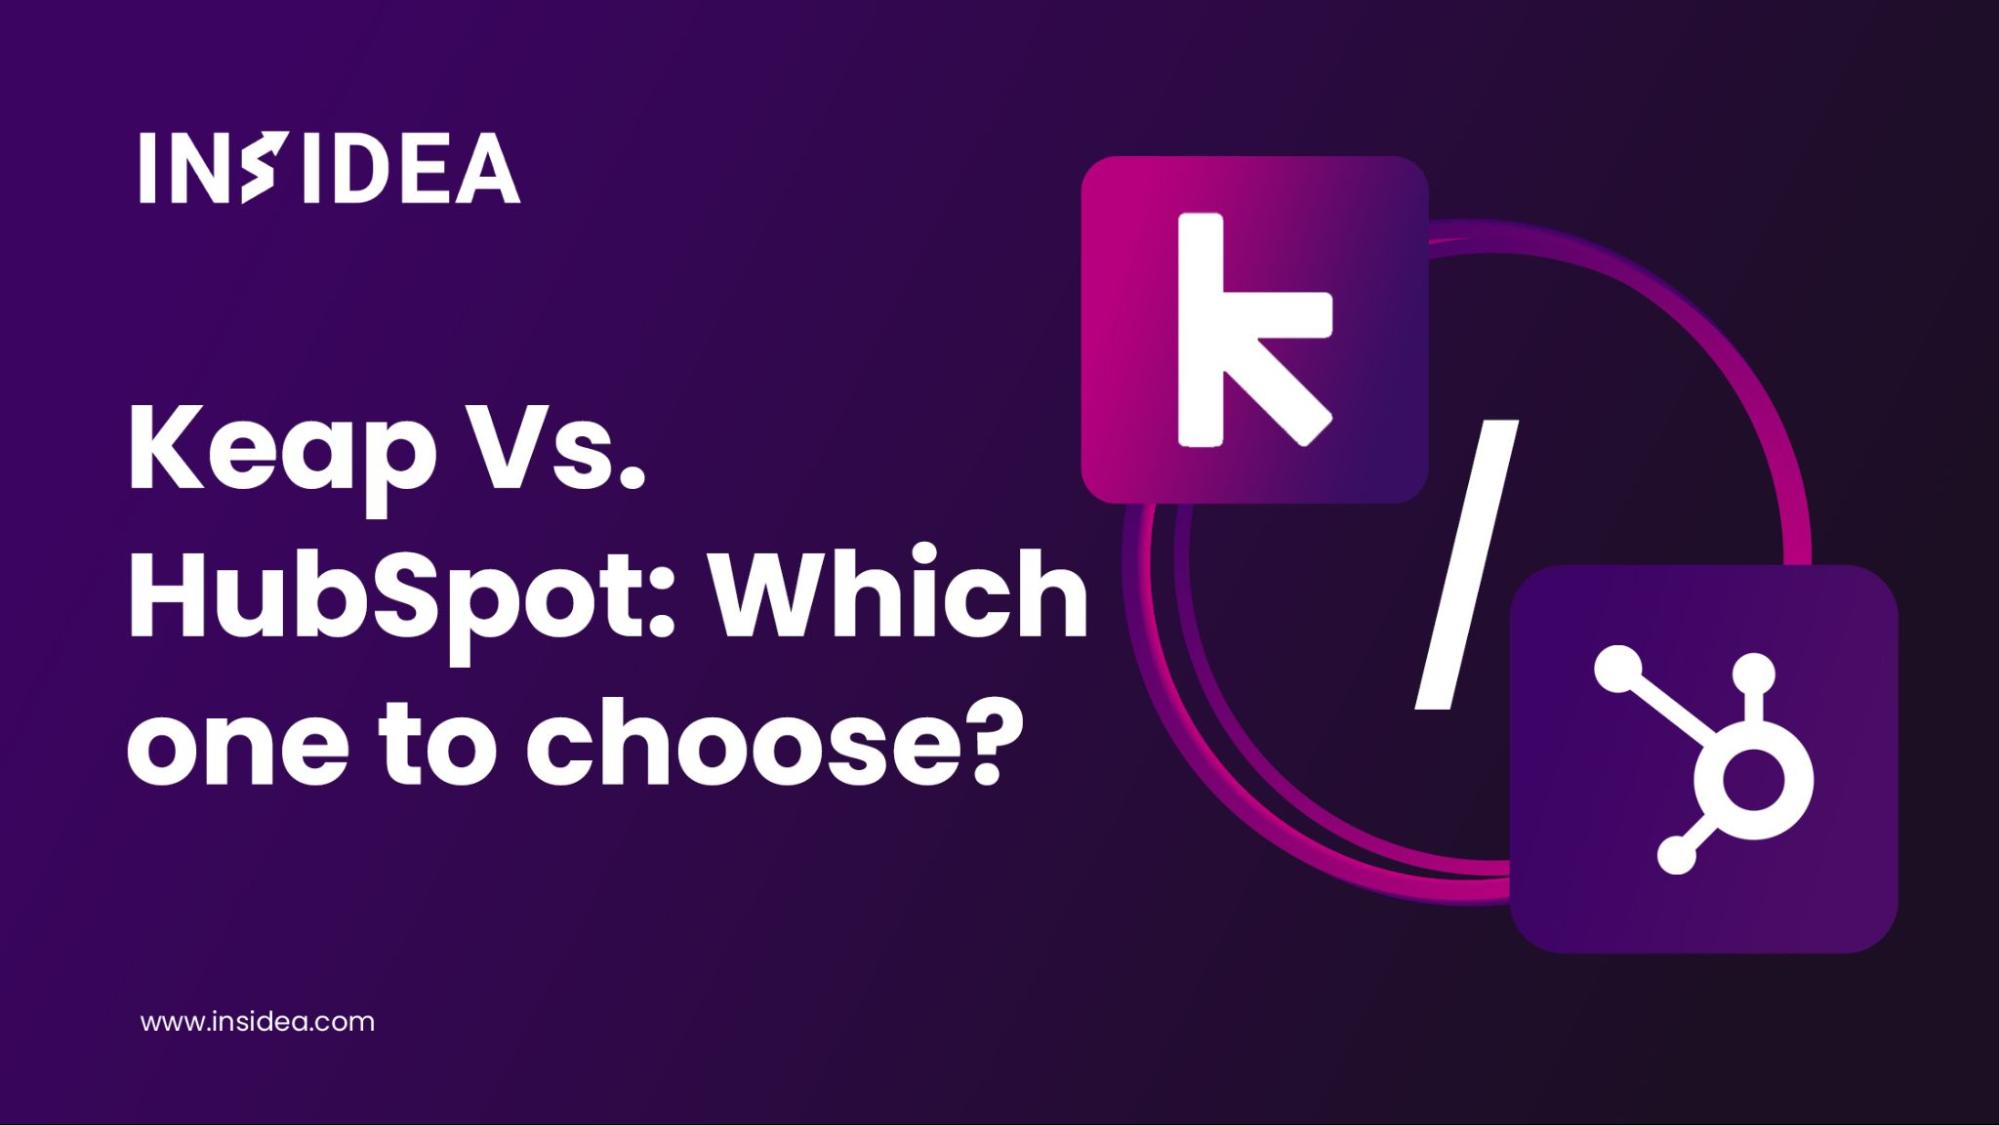 Keap Vs. HubSpot: Which one to choose?